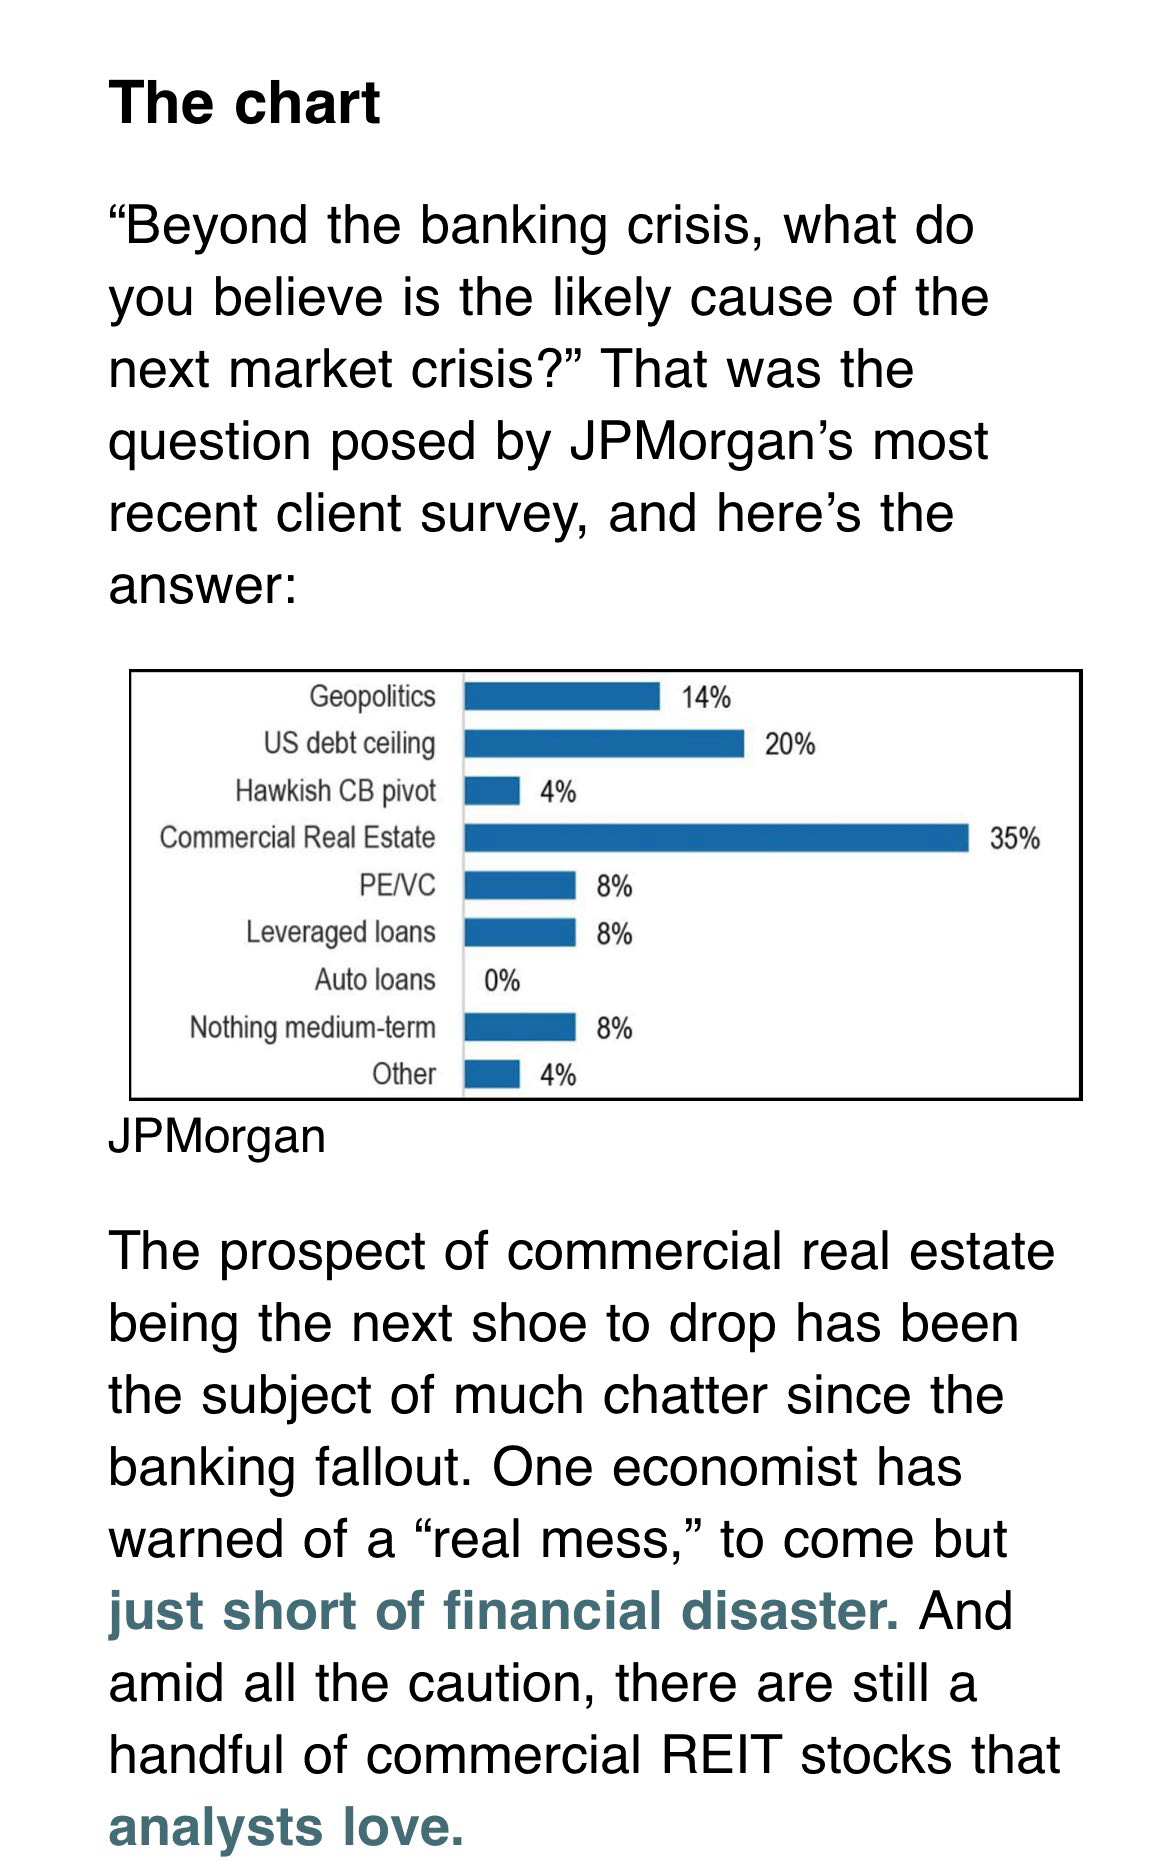 Commercial Real Estate Next Shoe to Drop Amid Banking Crisis - JPM via MrTopStep